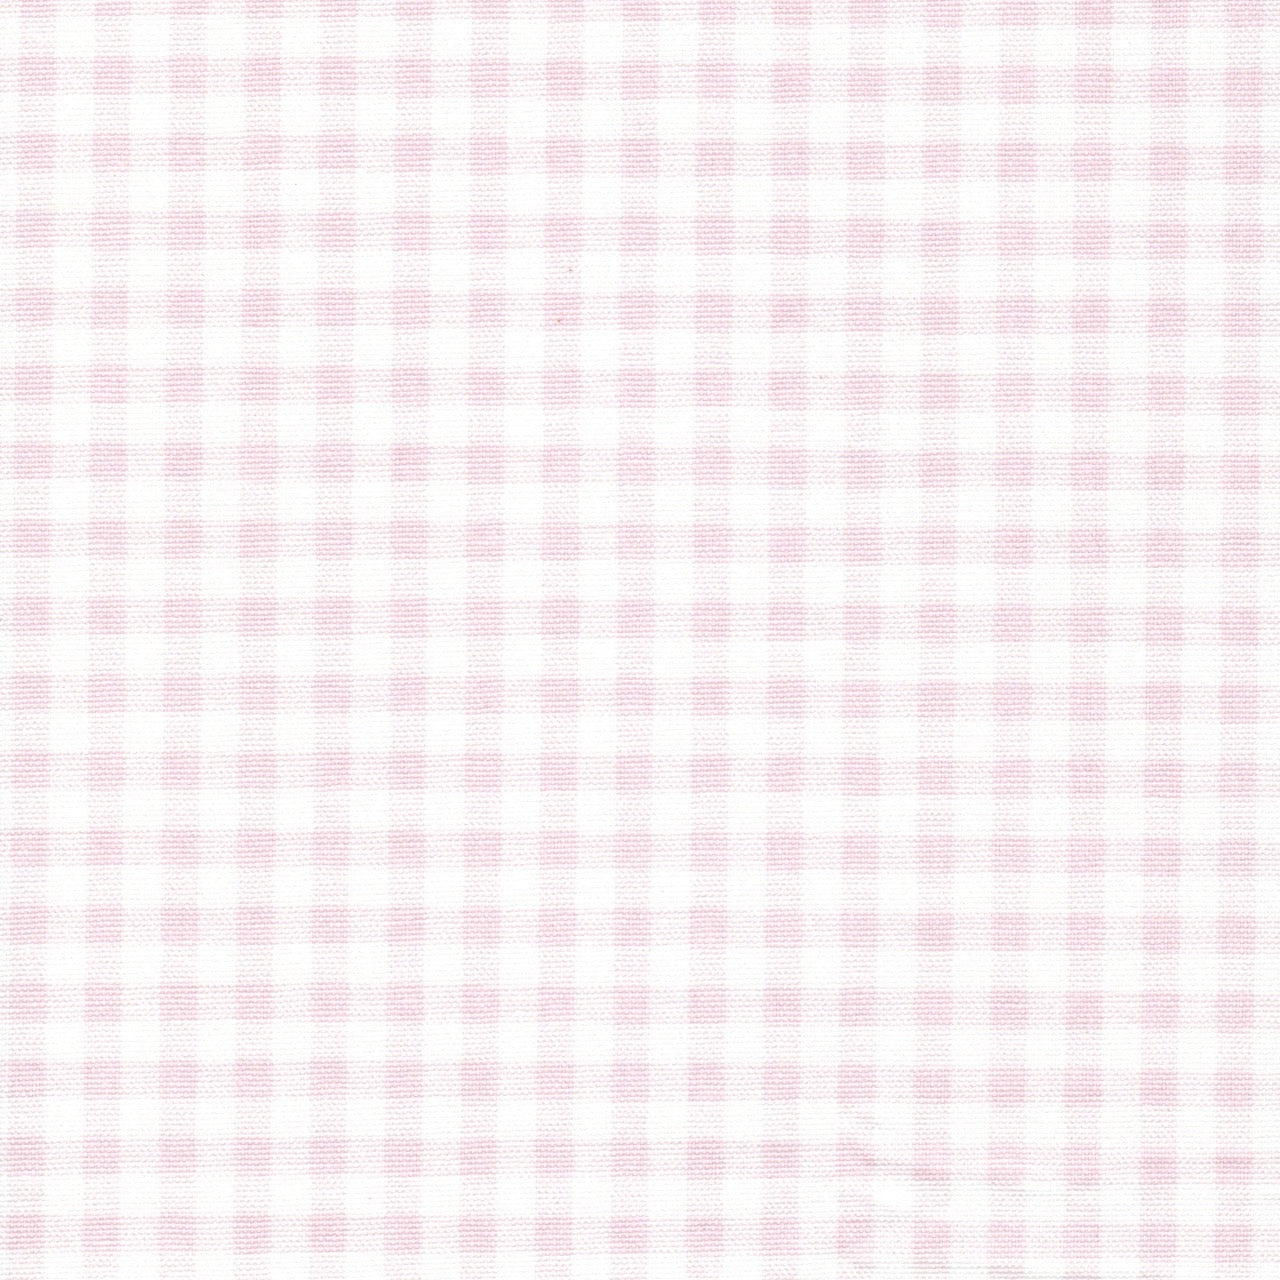 Tailored Tier Curtains in Bella Pink Large Gingham Check on White